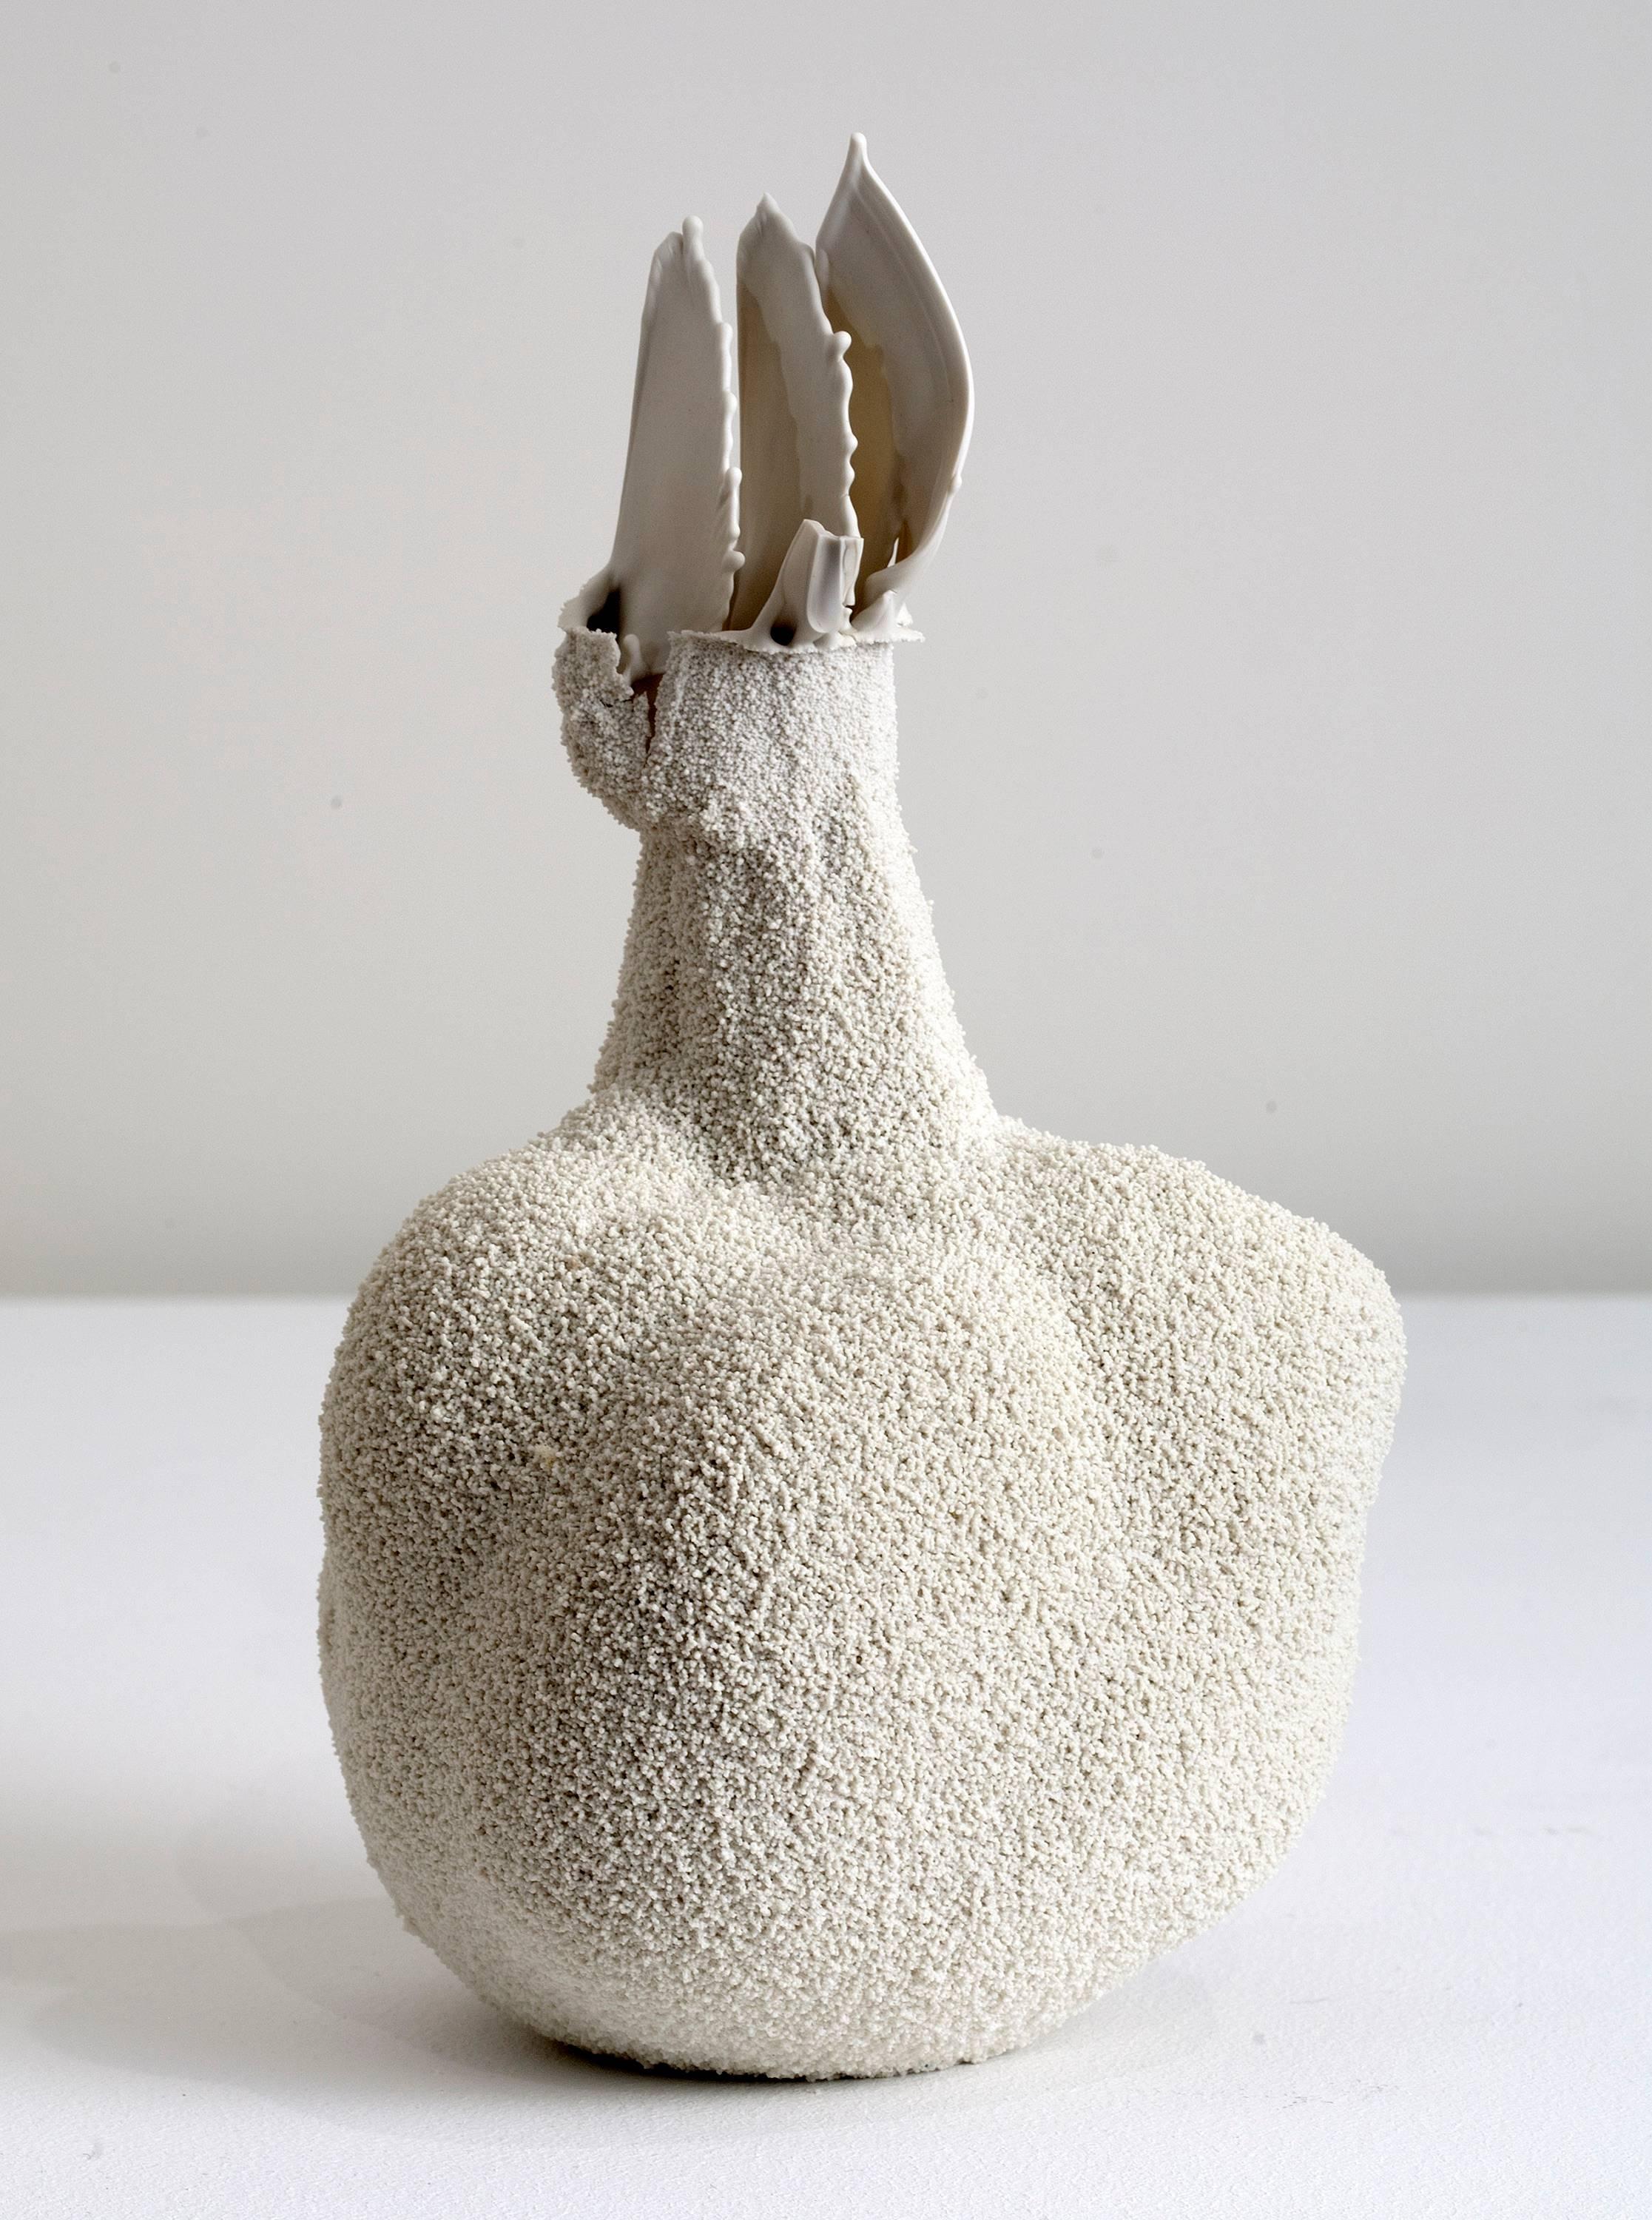 This is a small white ceramic vase by London-based Israeli artist Michal Fargo. She pours liquid porcelain into a hollowed block of foam, allowing it to settle into the pores. The vessel's final shape is determined by the material rather than the